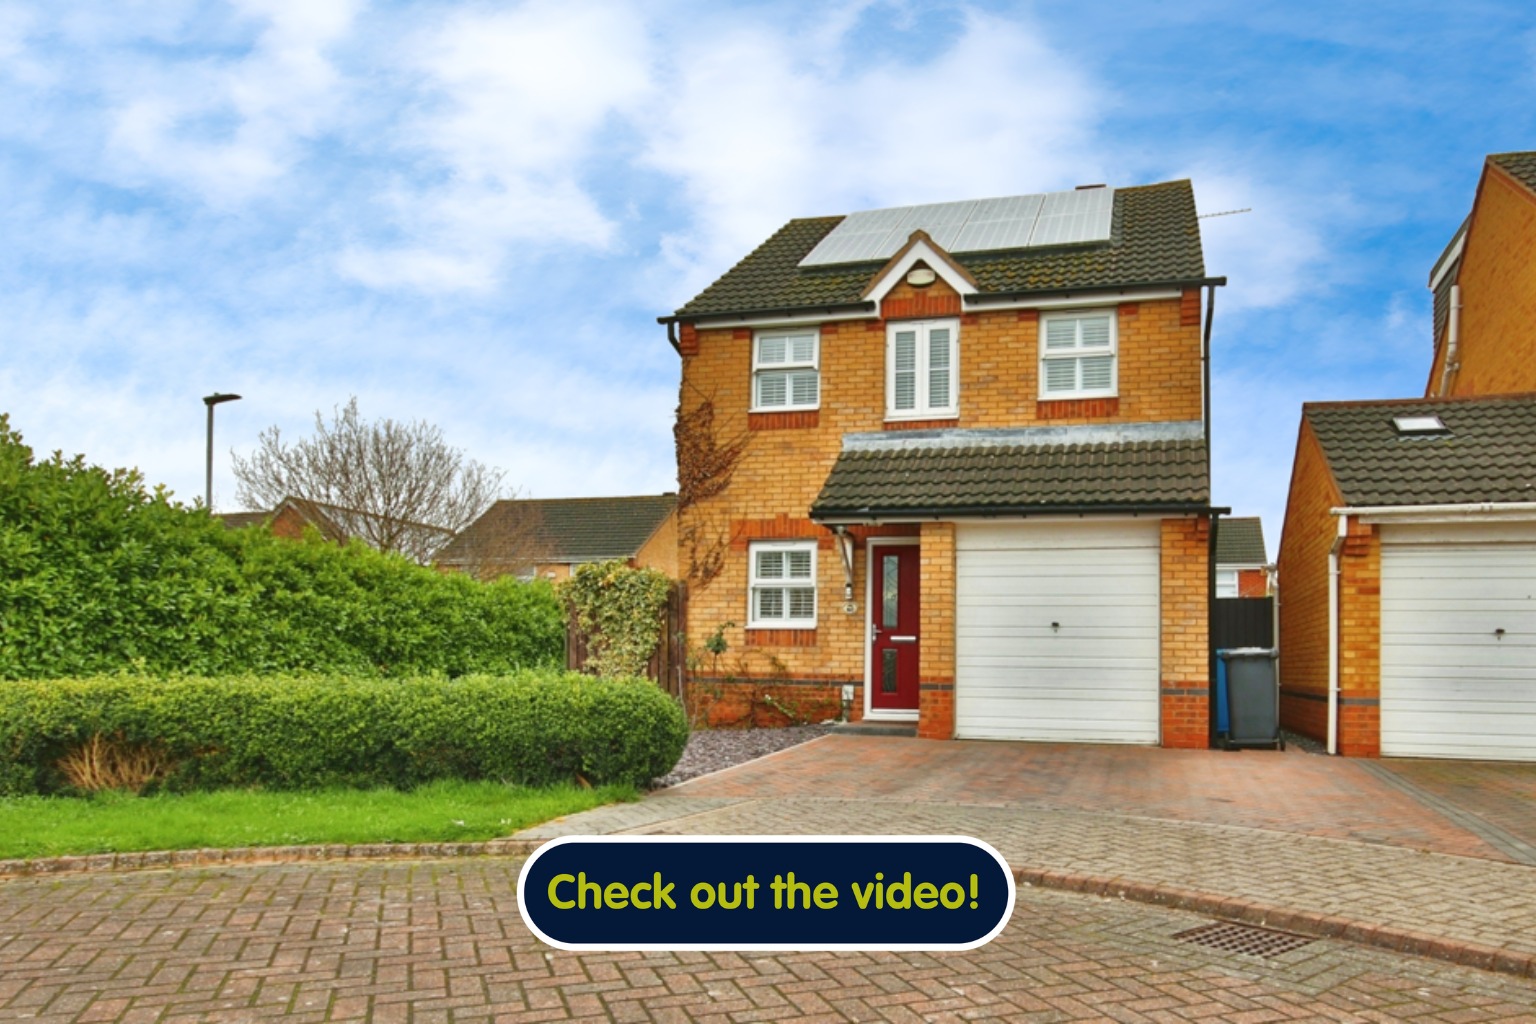 3 bed detached house for sale in Blackwater Way, Hull - Property Image 1